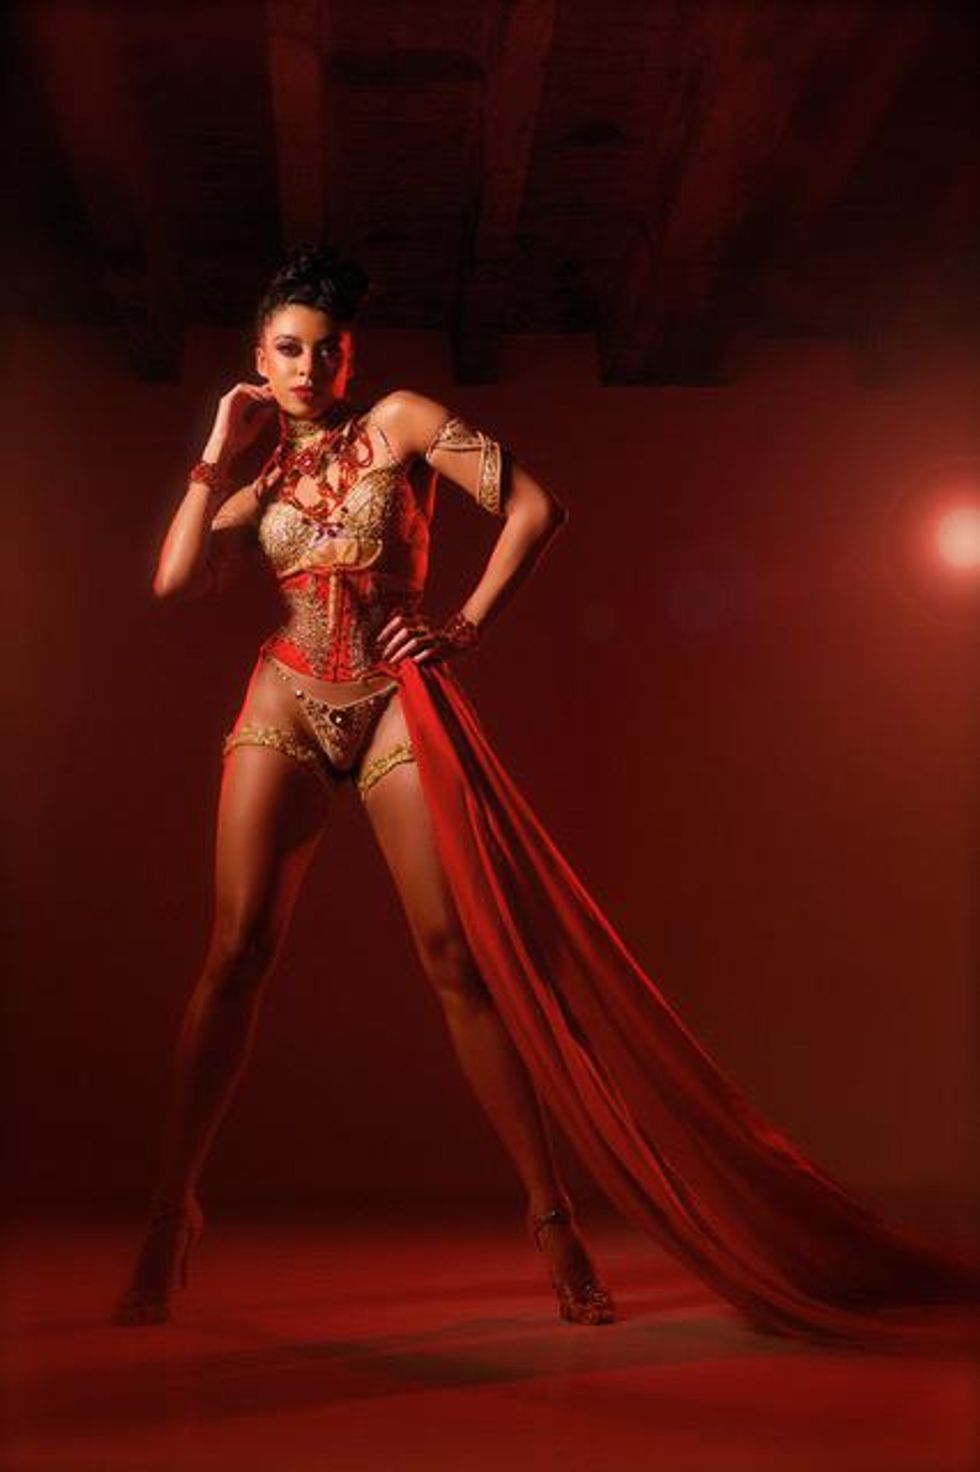 A woman staring intensely at the camera, with moody red lighting. She is wearing a decorative bikini style outfit, with a draped cloth running from her hip.